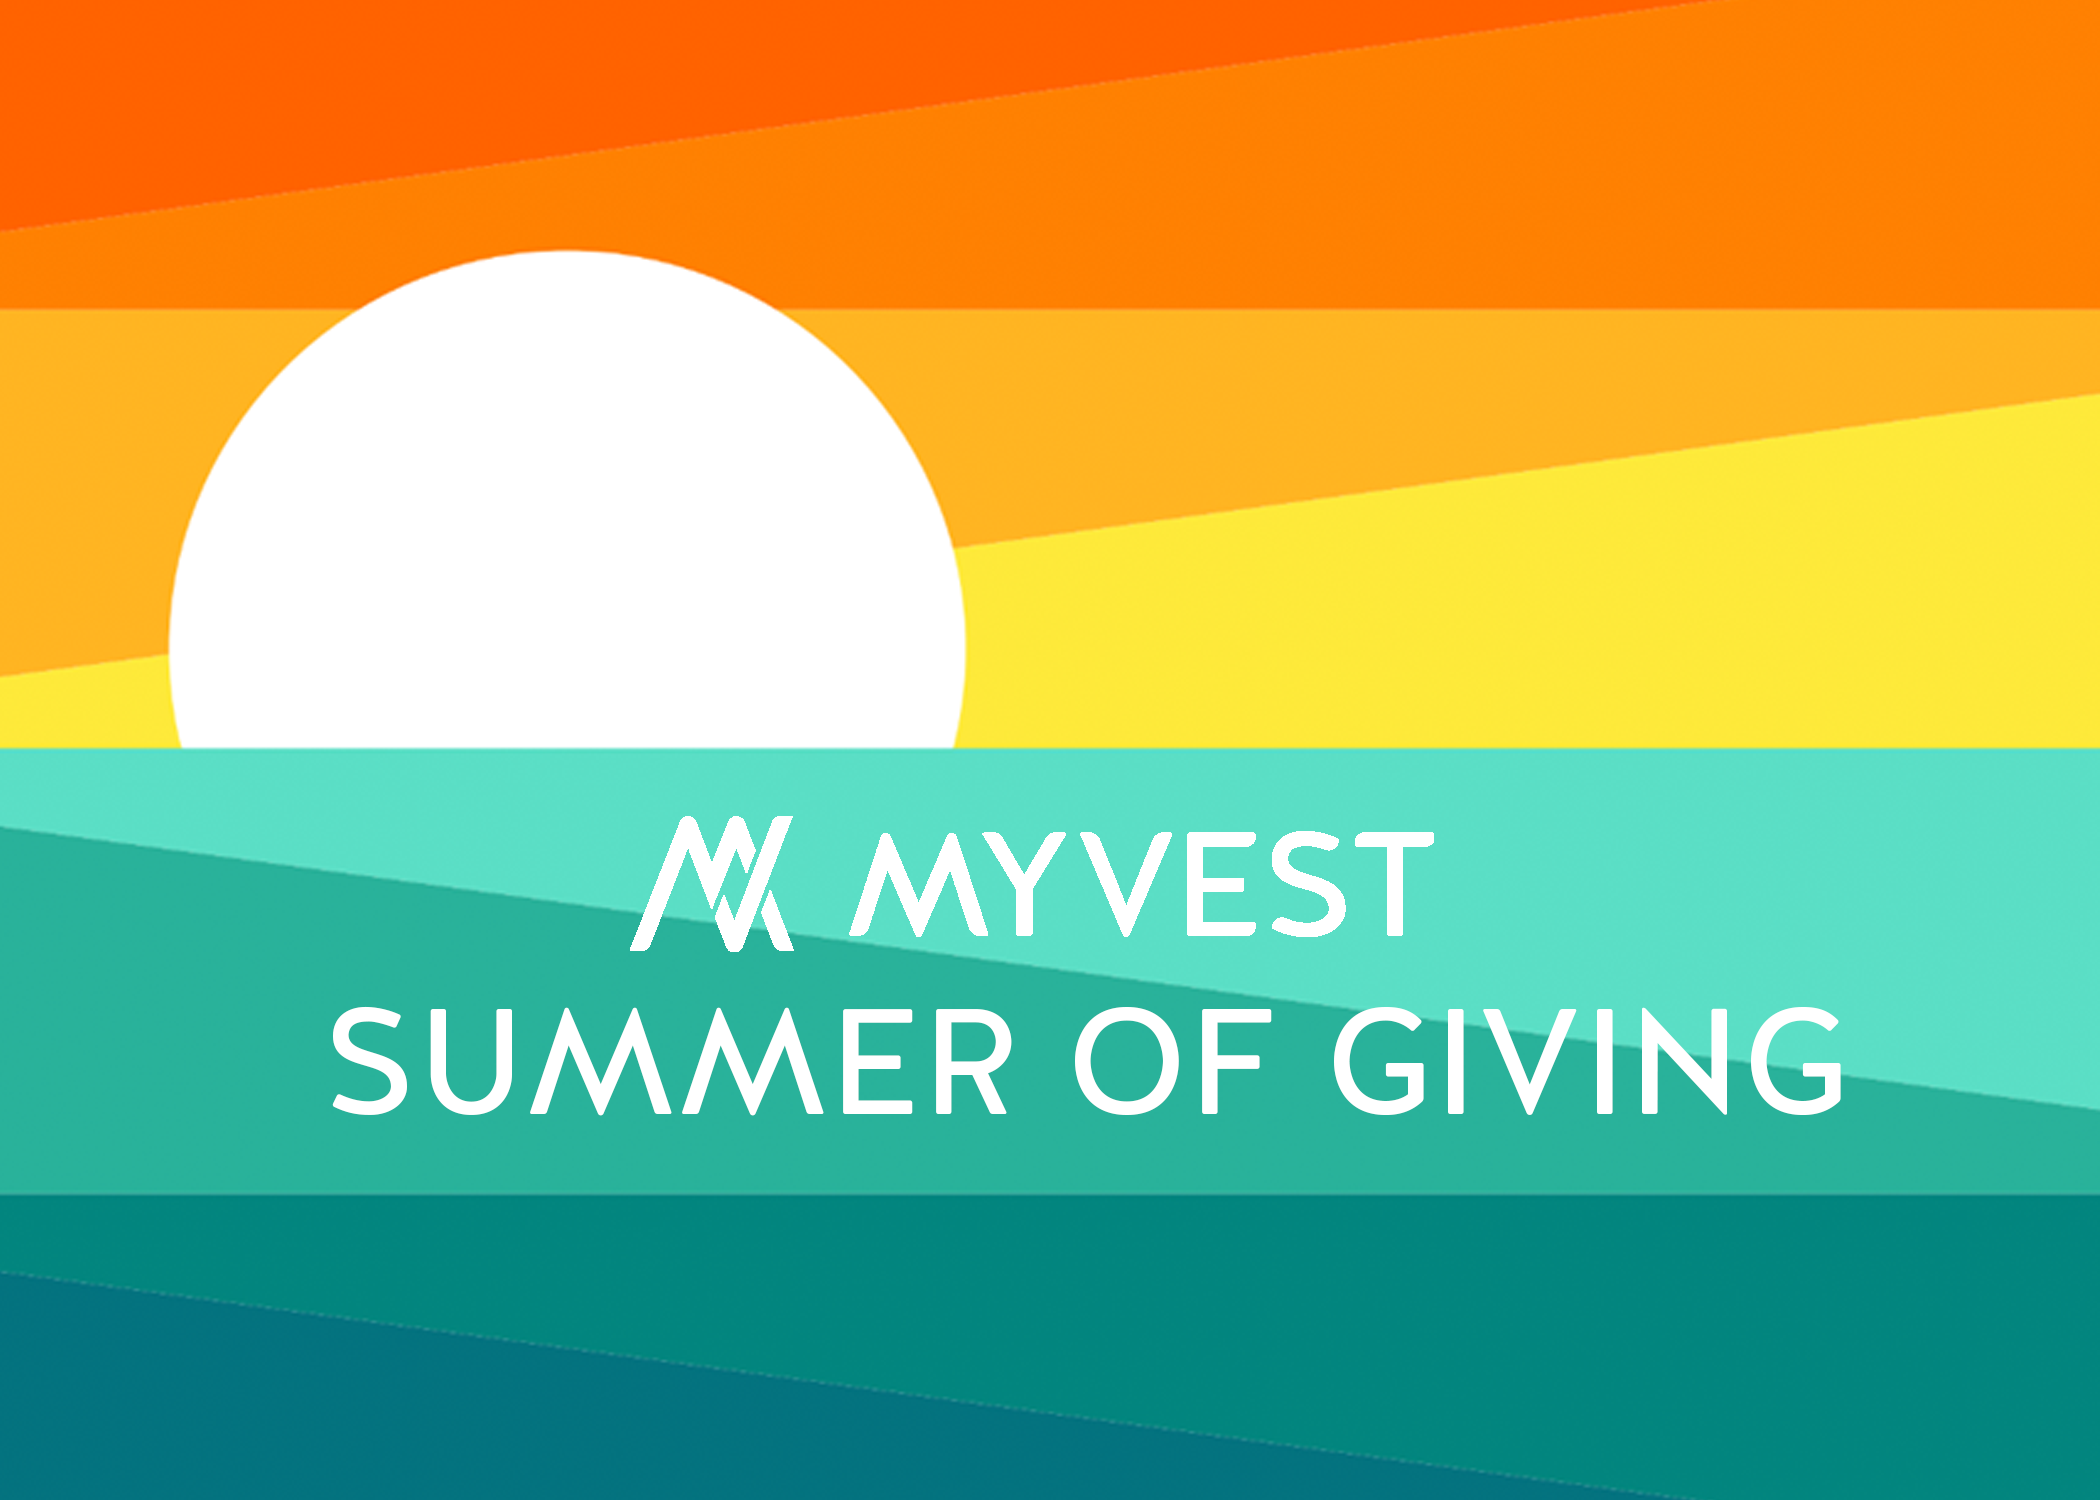 MyVestors Support Charities through Summer of Giving